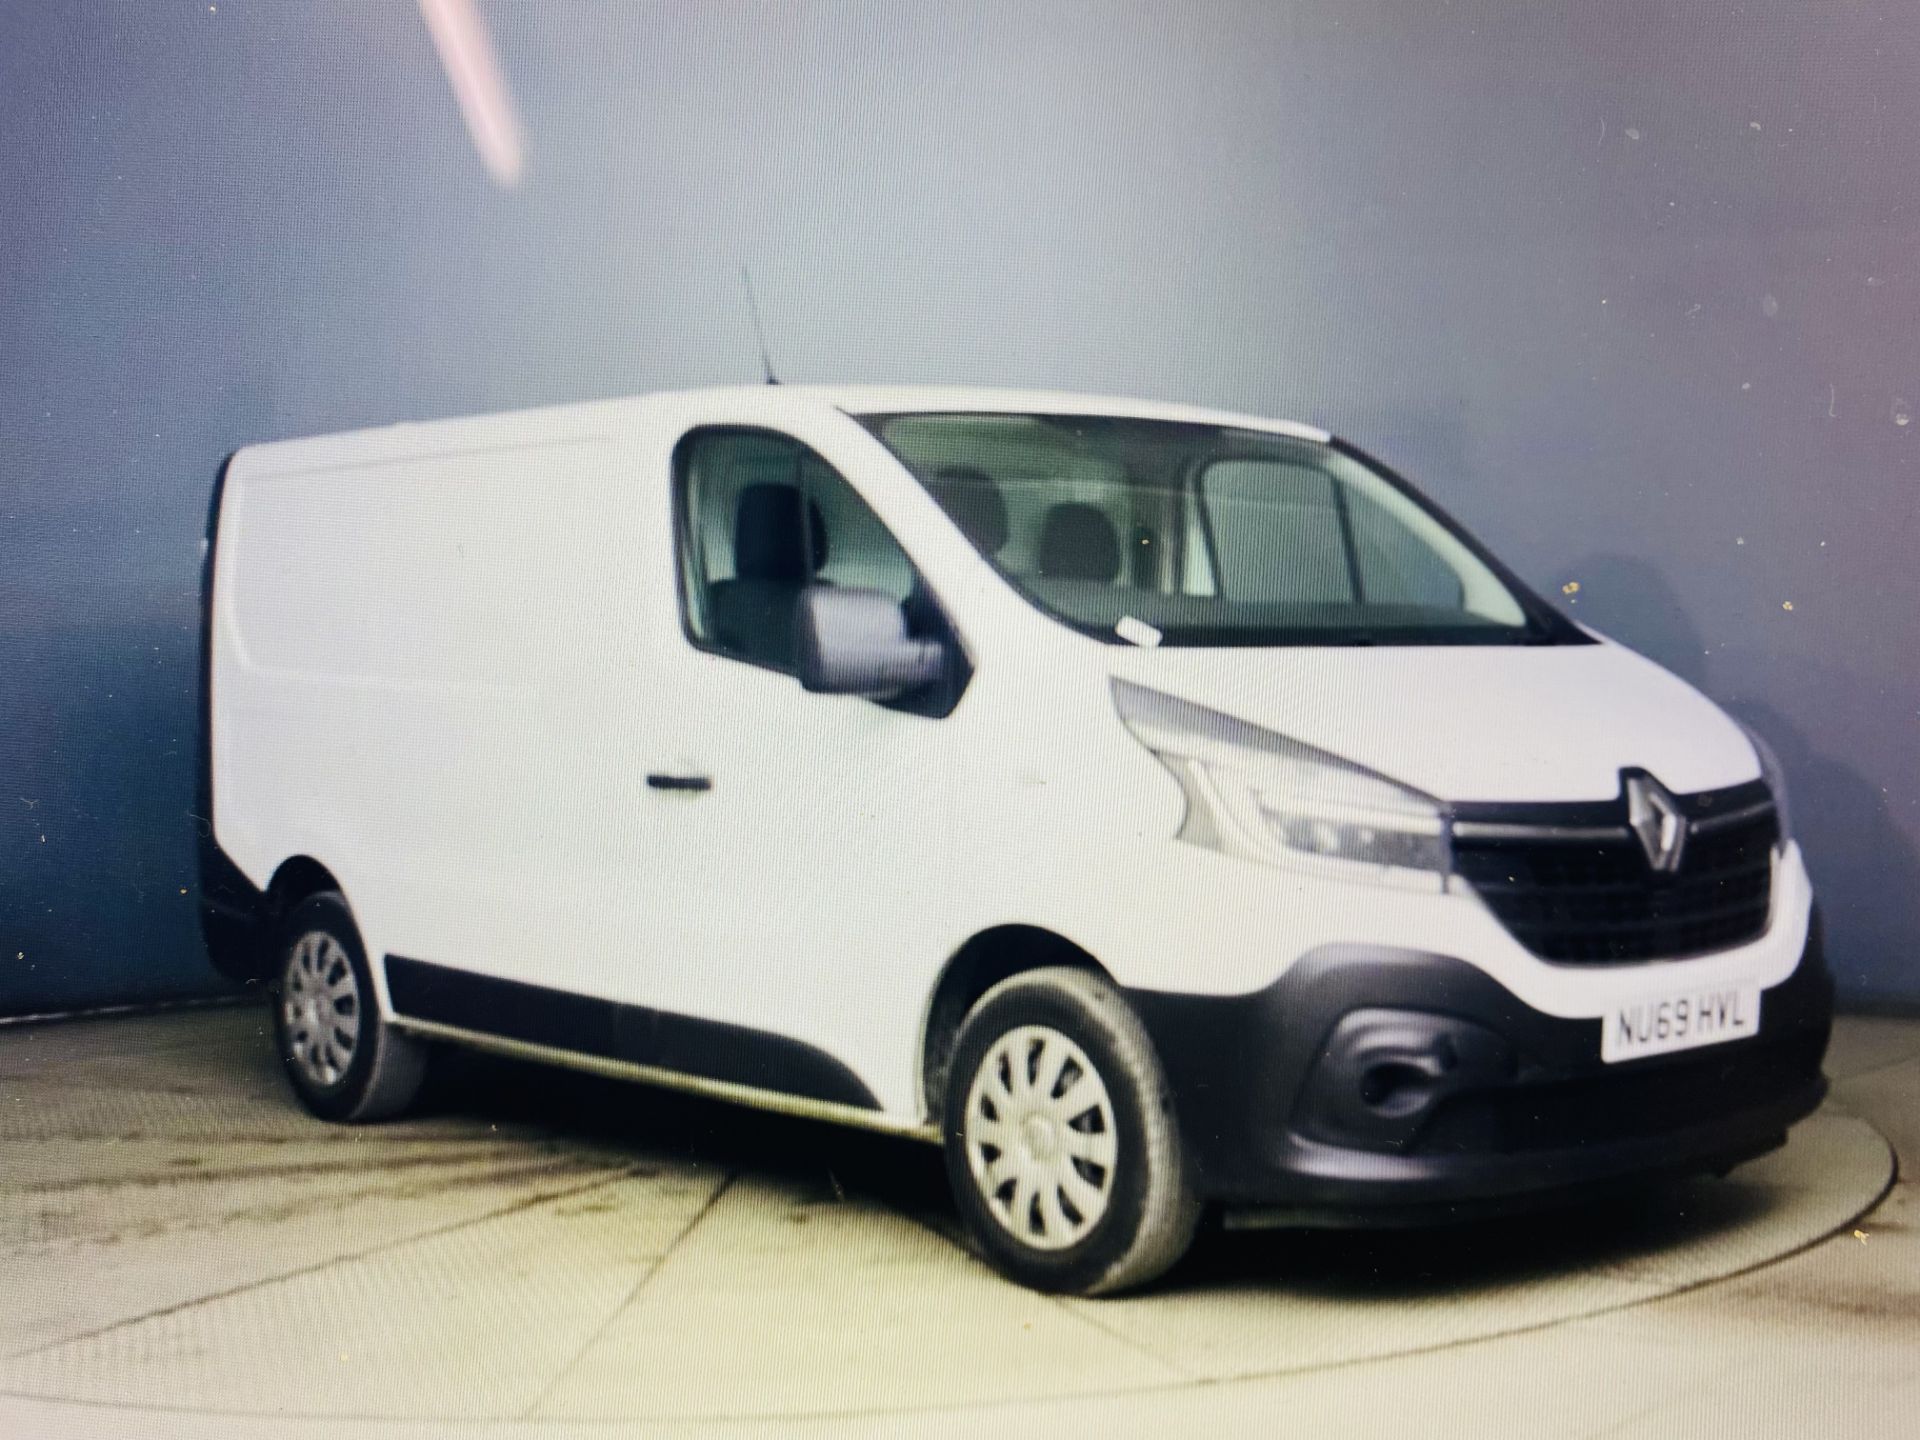 (On Sale) RENAULT TRAFIC SL28 2.0"CDTI" (120) ENERGY "BUSINESS" 69 REG - 1 KEEPER - LOW MILES - WOW